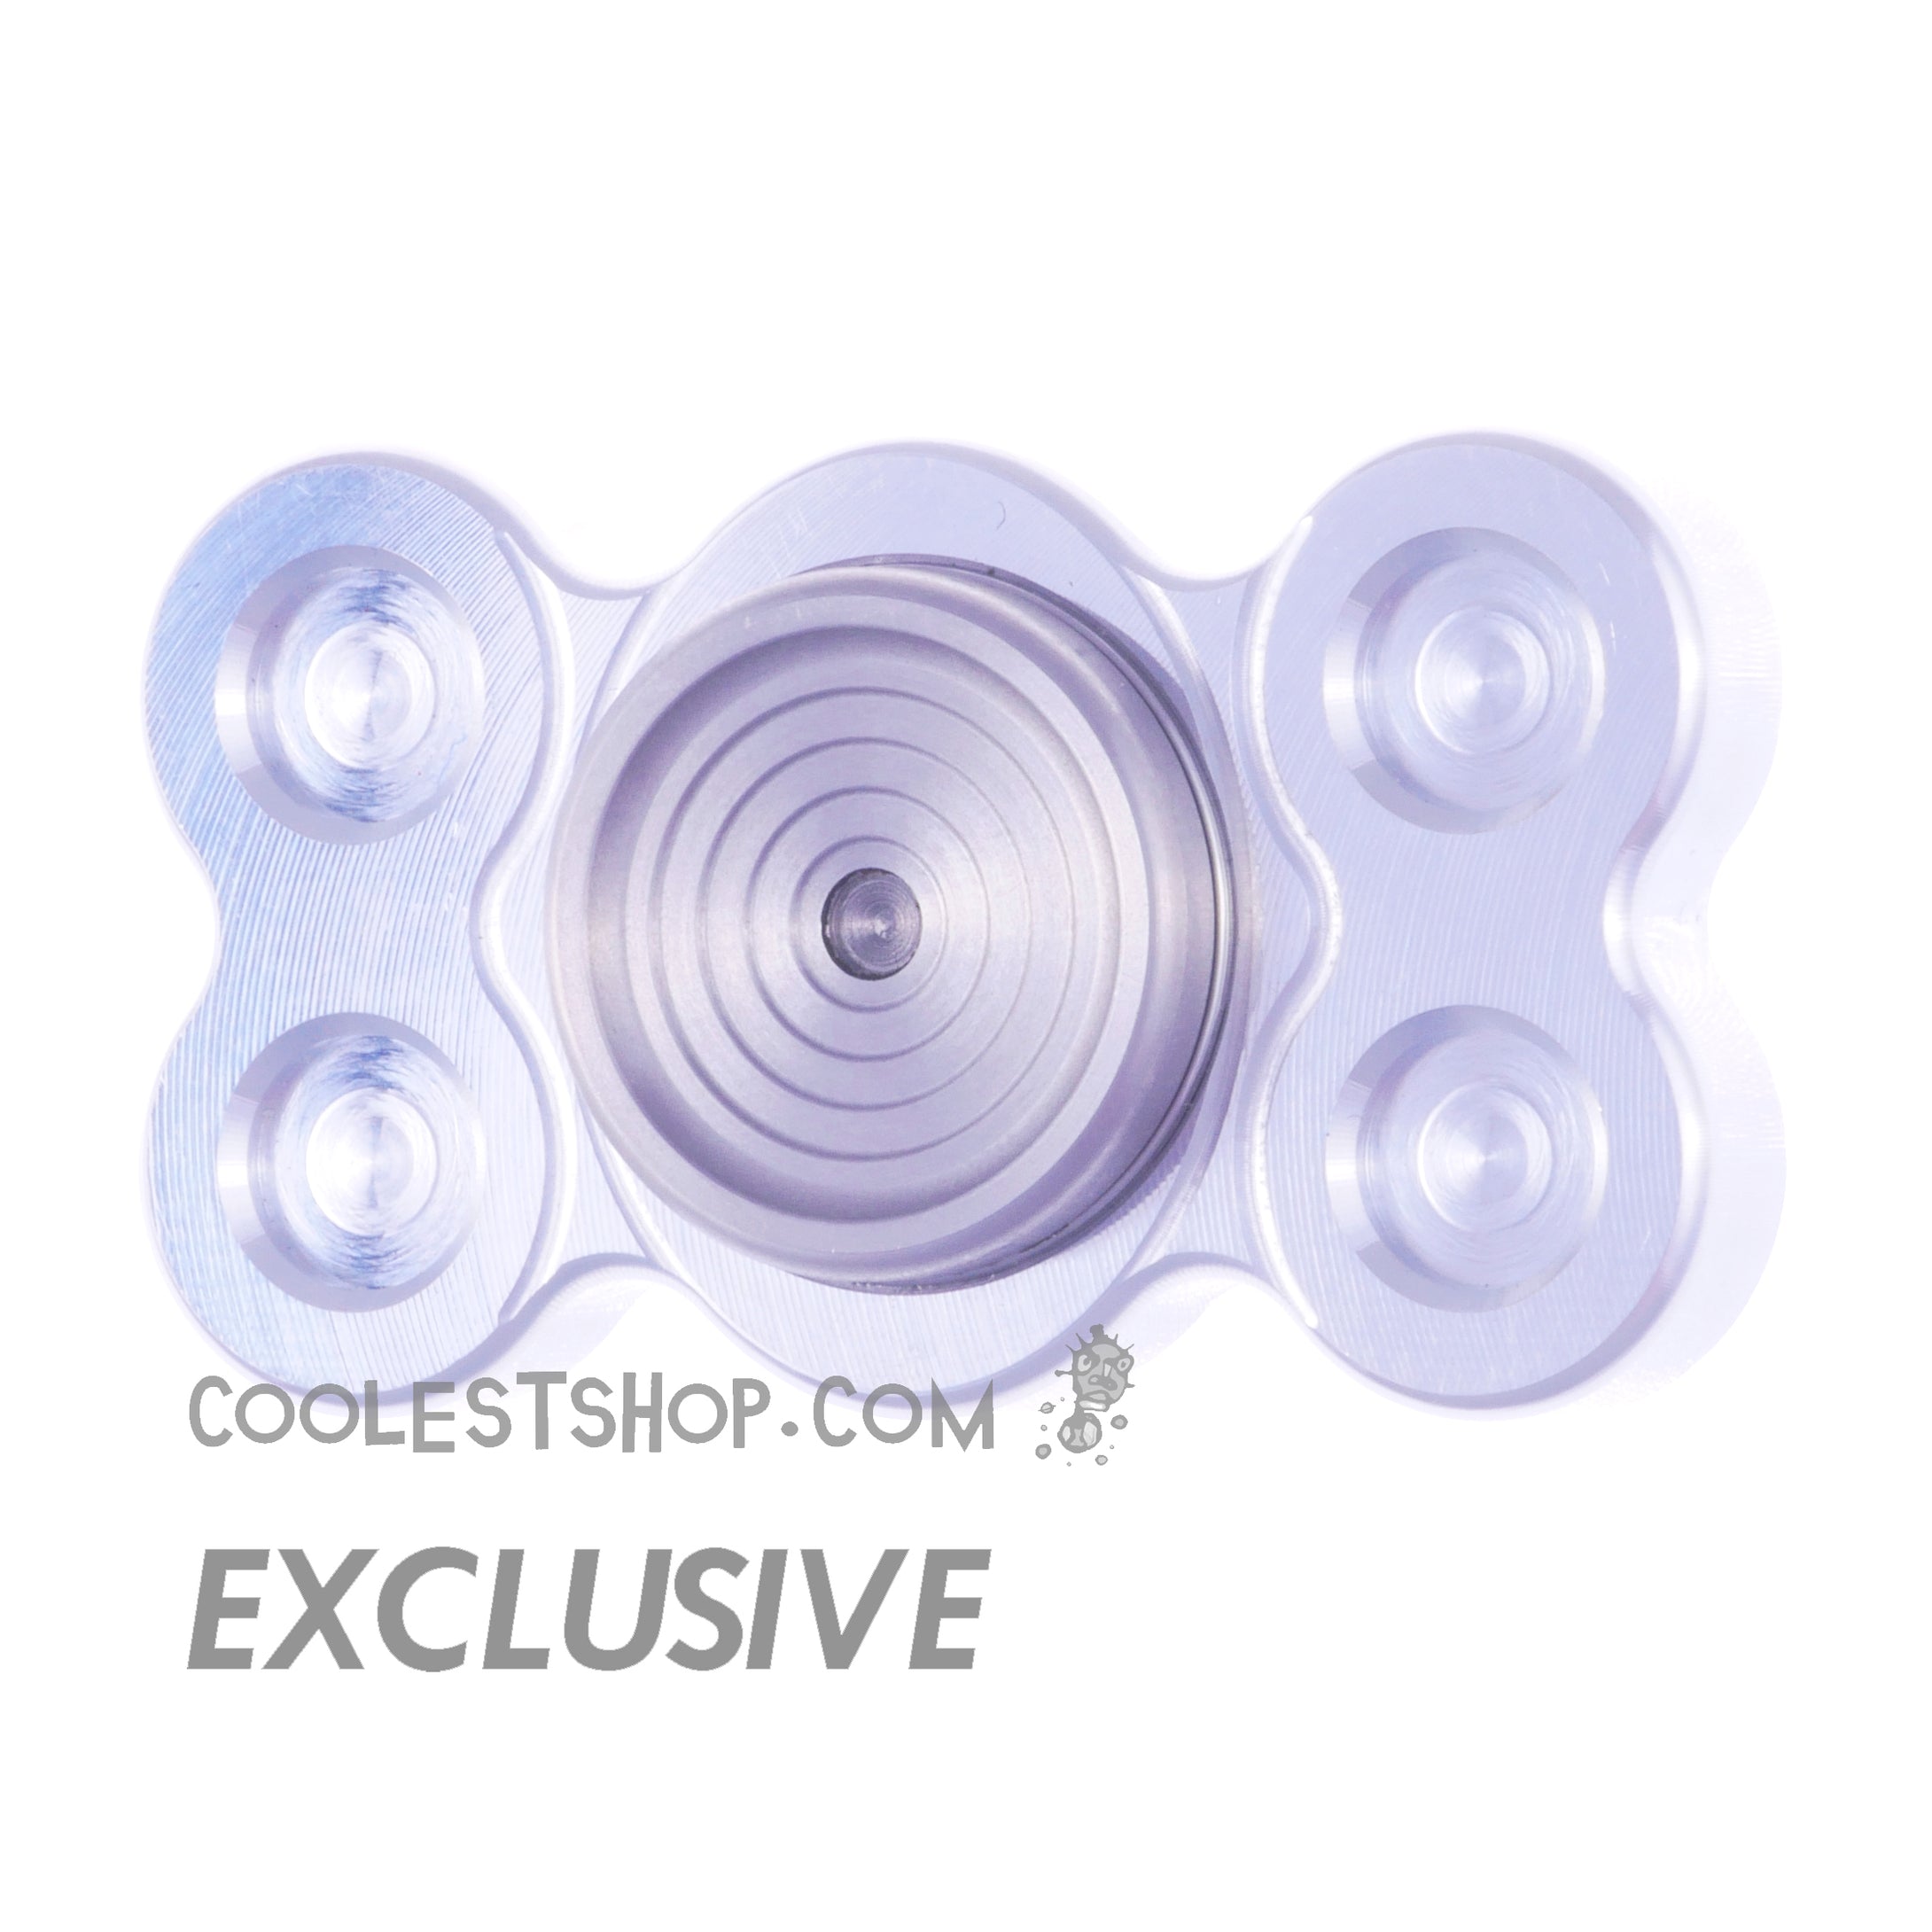 808 Spinner • GEN 1 • made in the USA • NTO HYBRID Version featuring a Stainless Steel Revspin R188 Core with Stainless Steel Buttons • Aluminum body